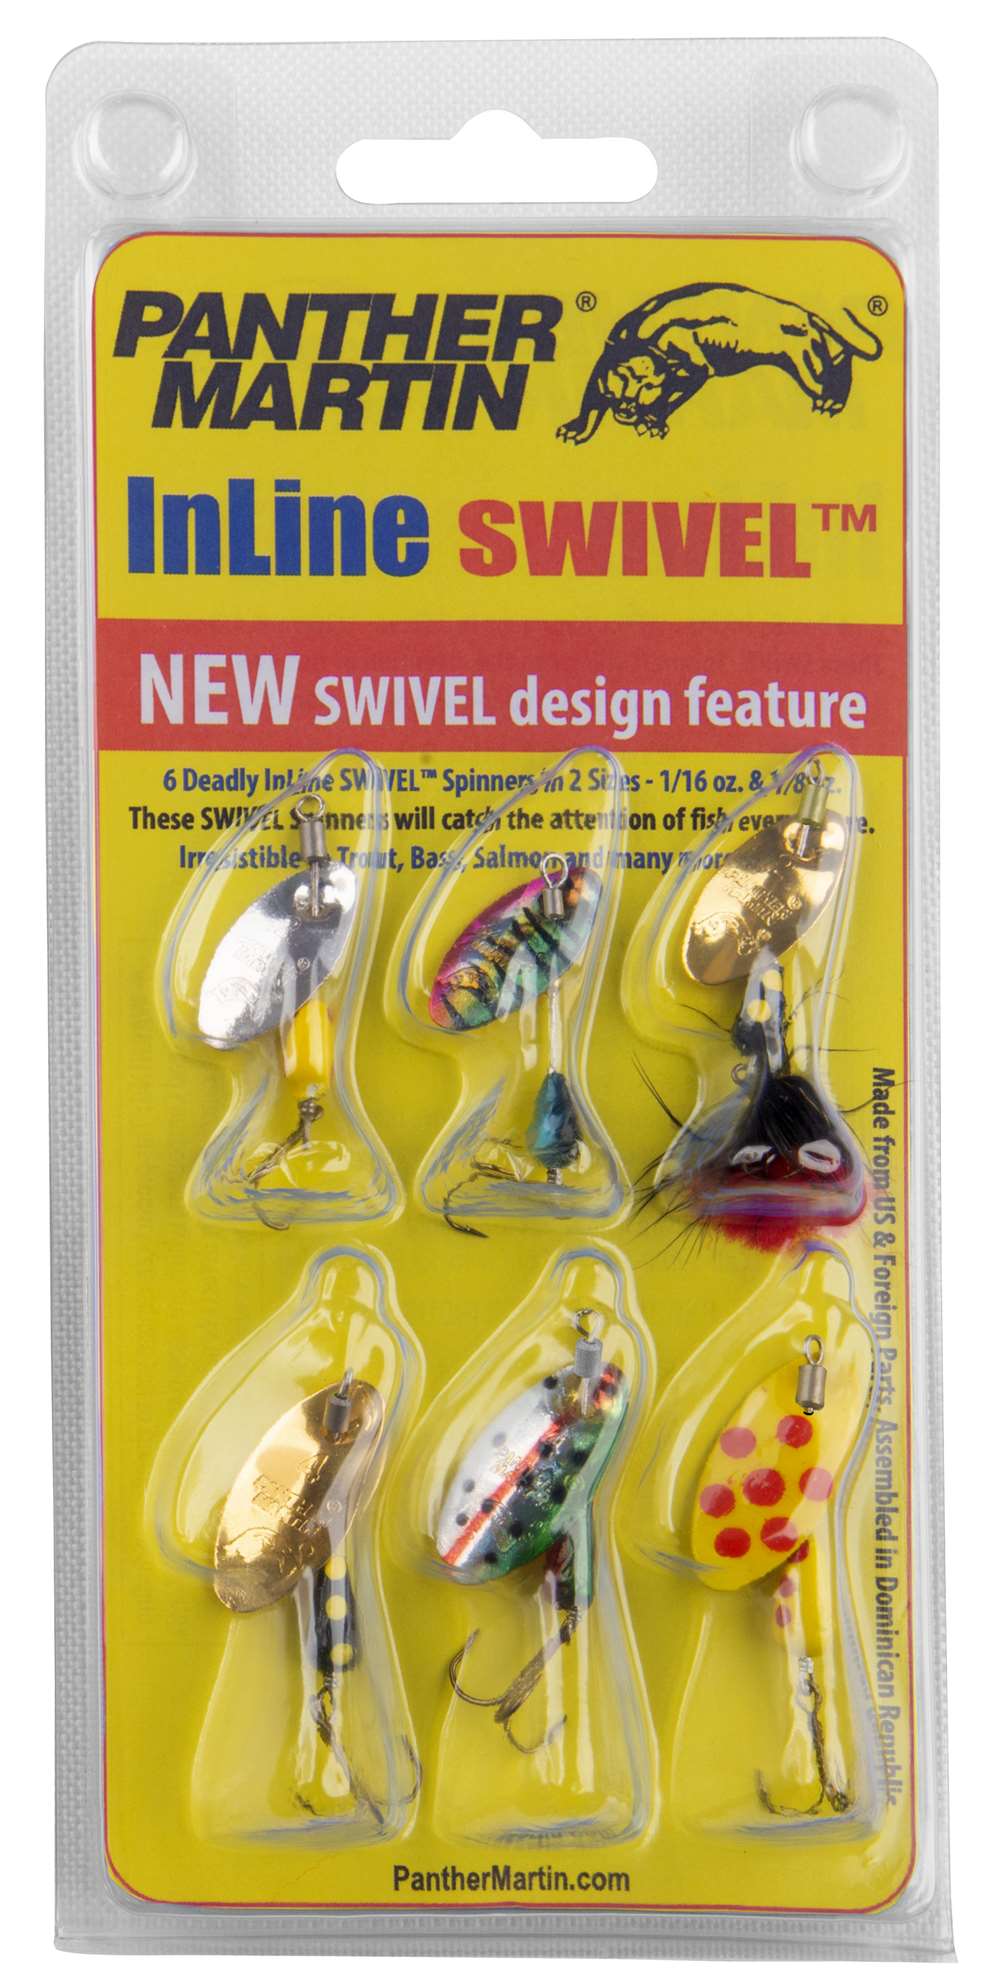 Premium Handmade Fishing Spinners Gold Silver Lures for Trout, Bass,  Salmon, Panfish Propeller for Big Flash & Vibration Great Gift -   Australia